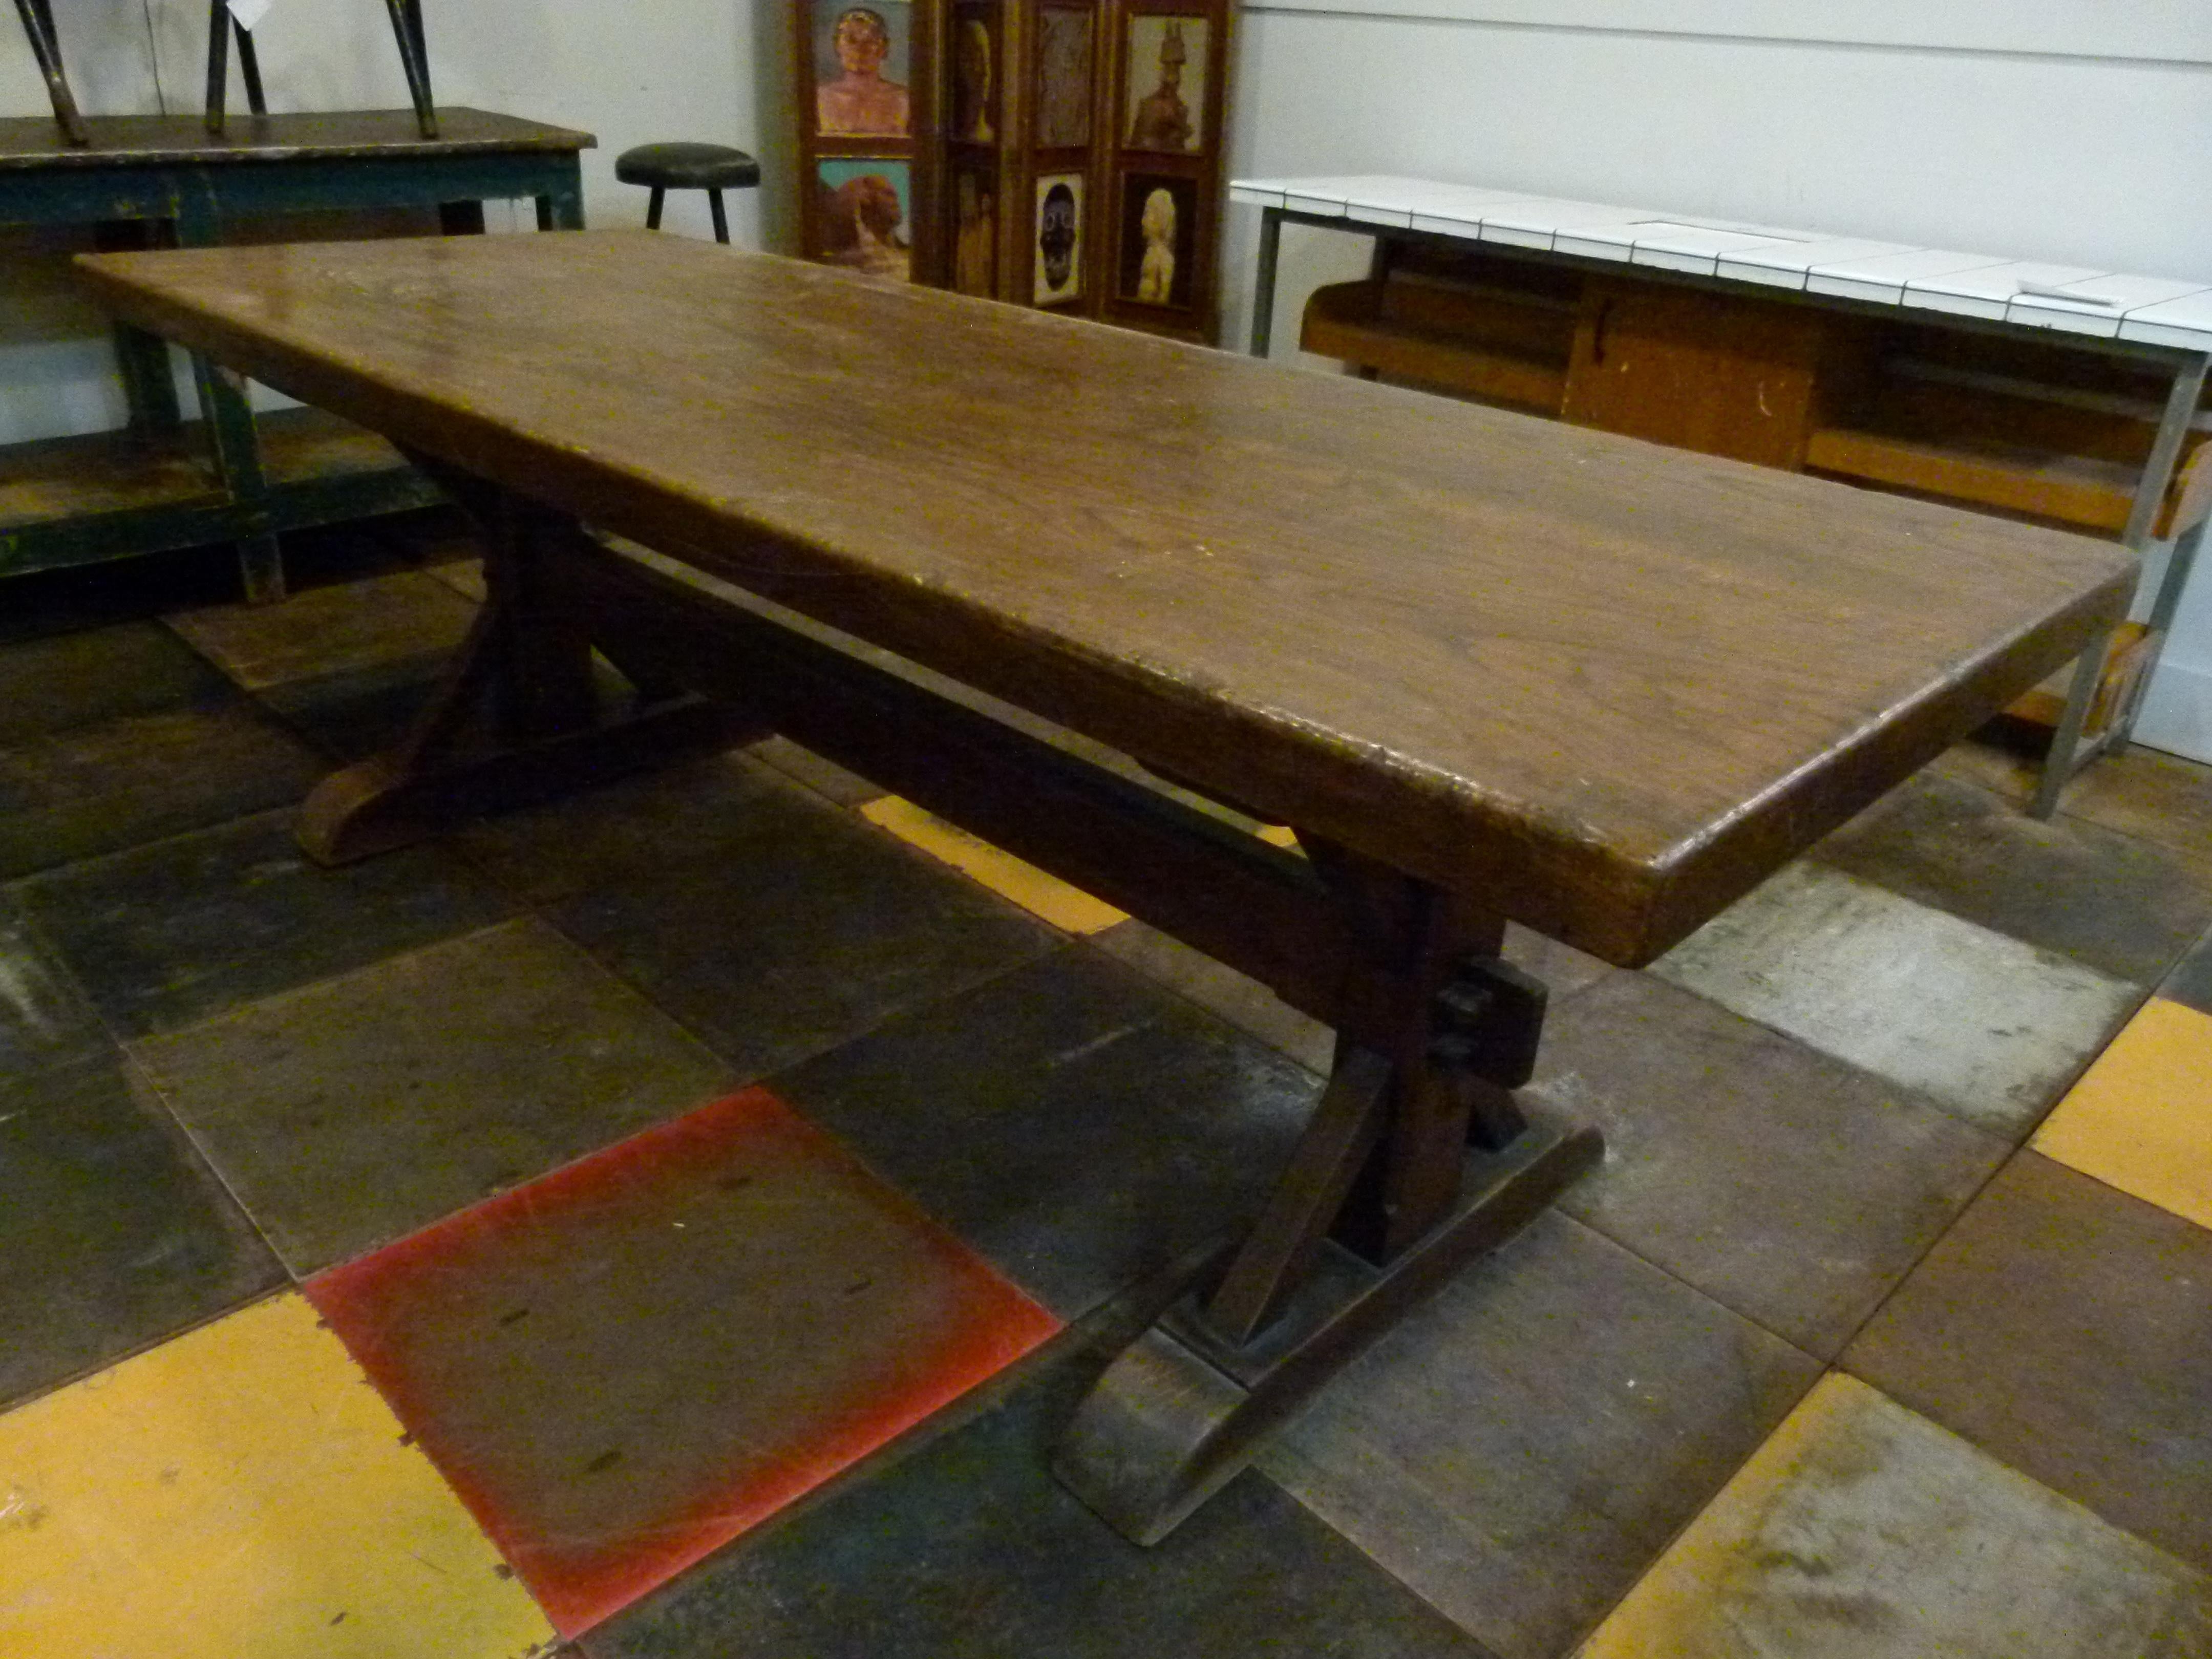 20th century oak table in monastery style in France. This design is very stable and robust.The solid base allows to sit comfortably since it gives enough room for the legs while sitting.